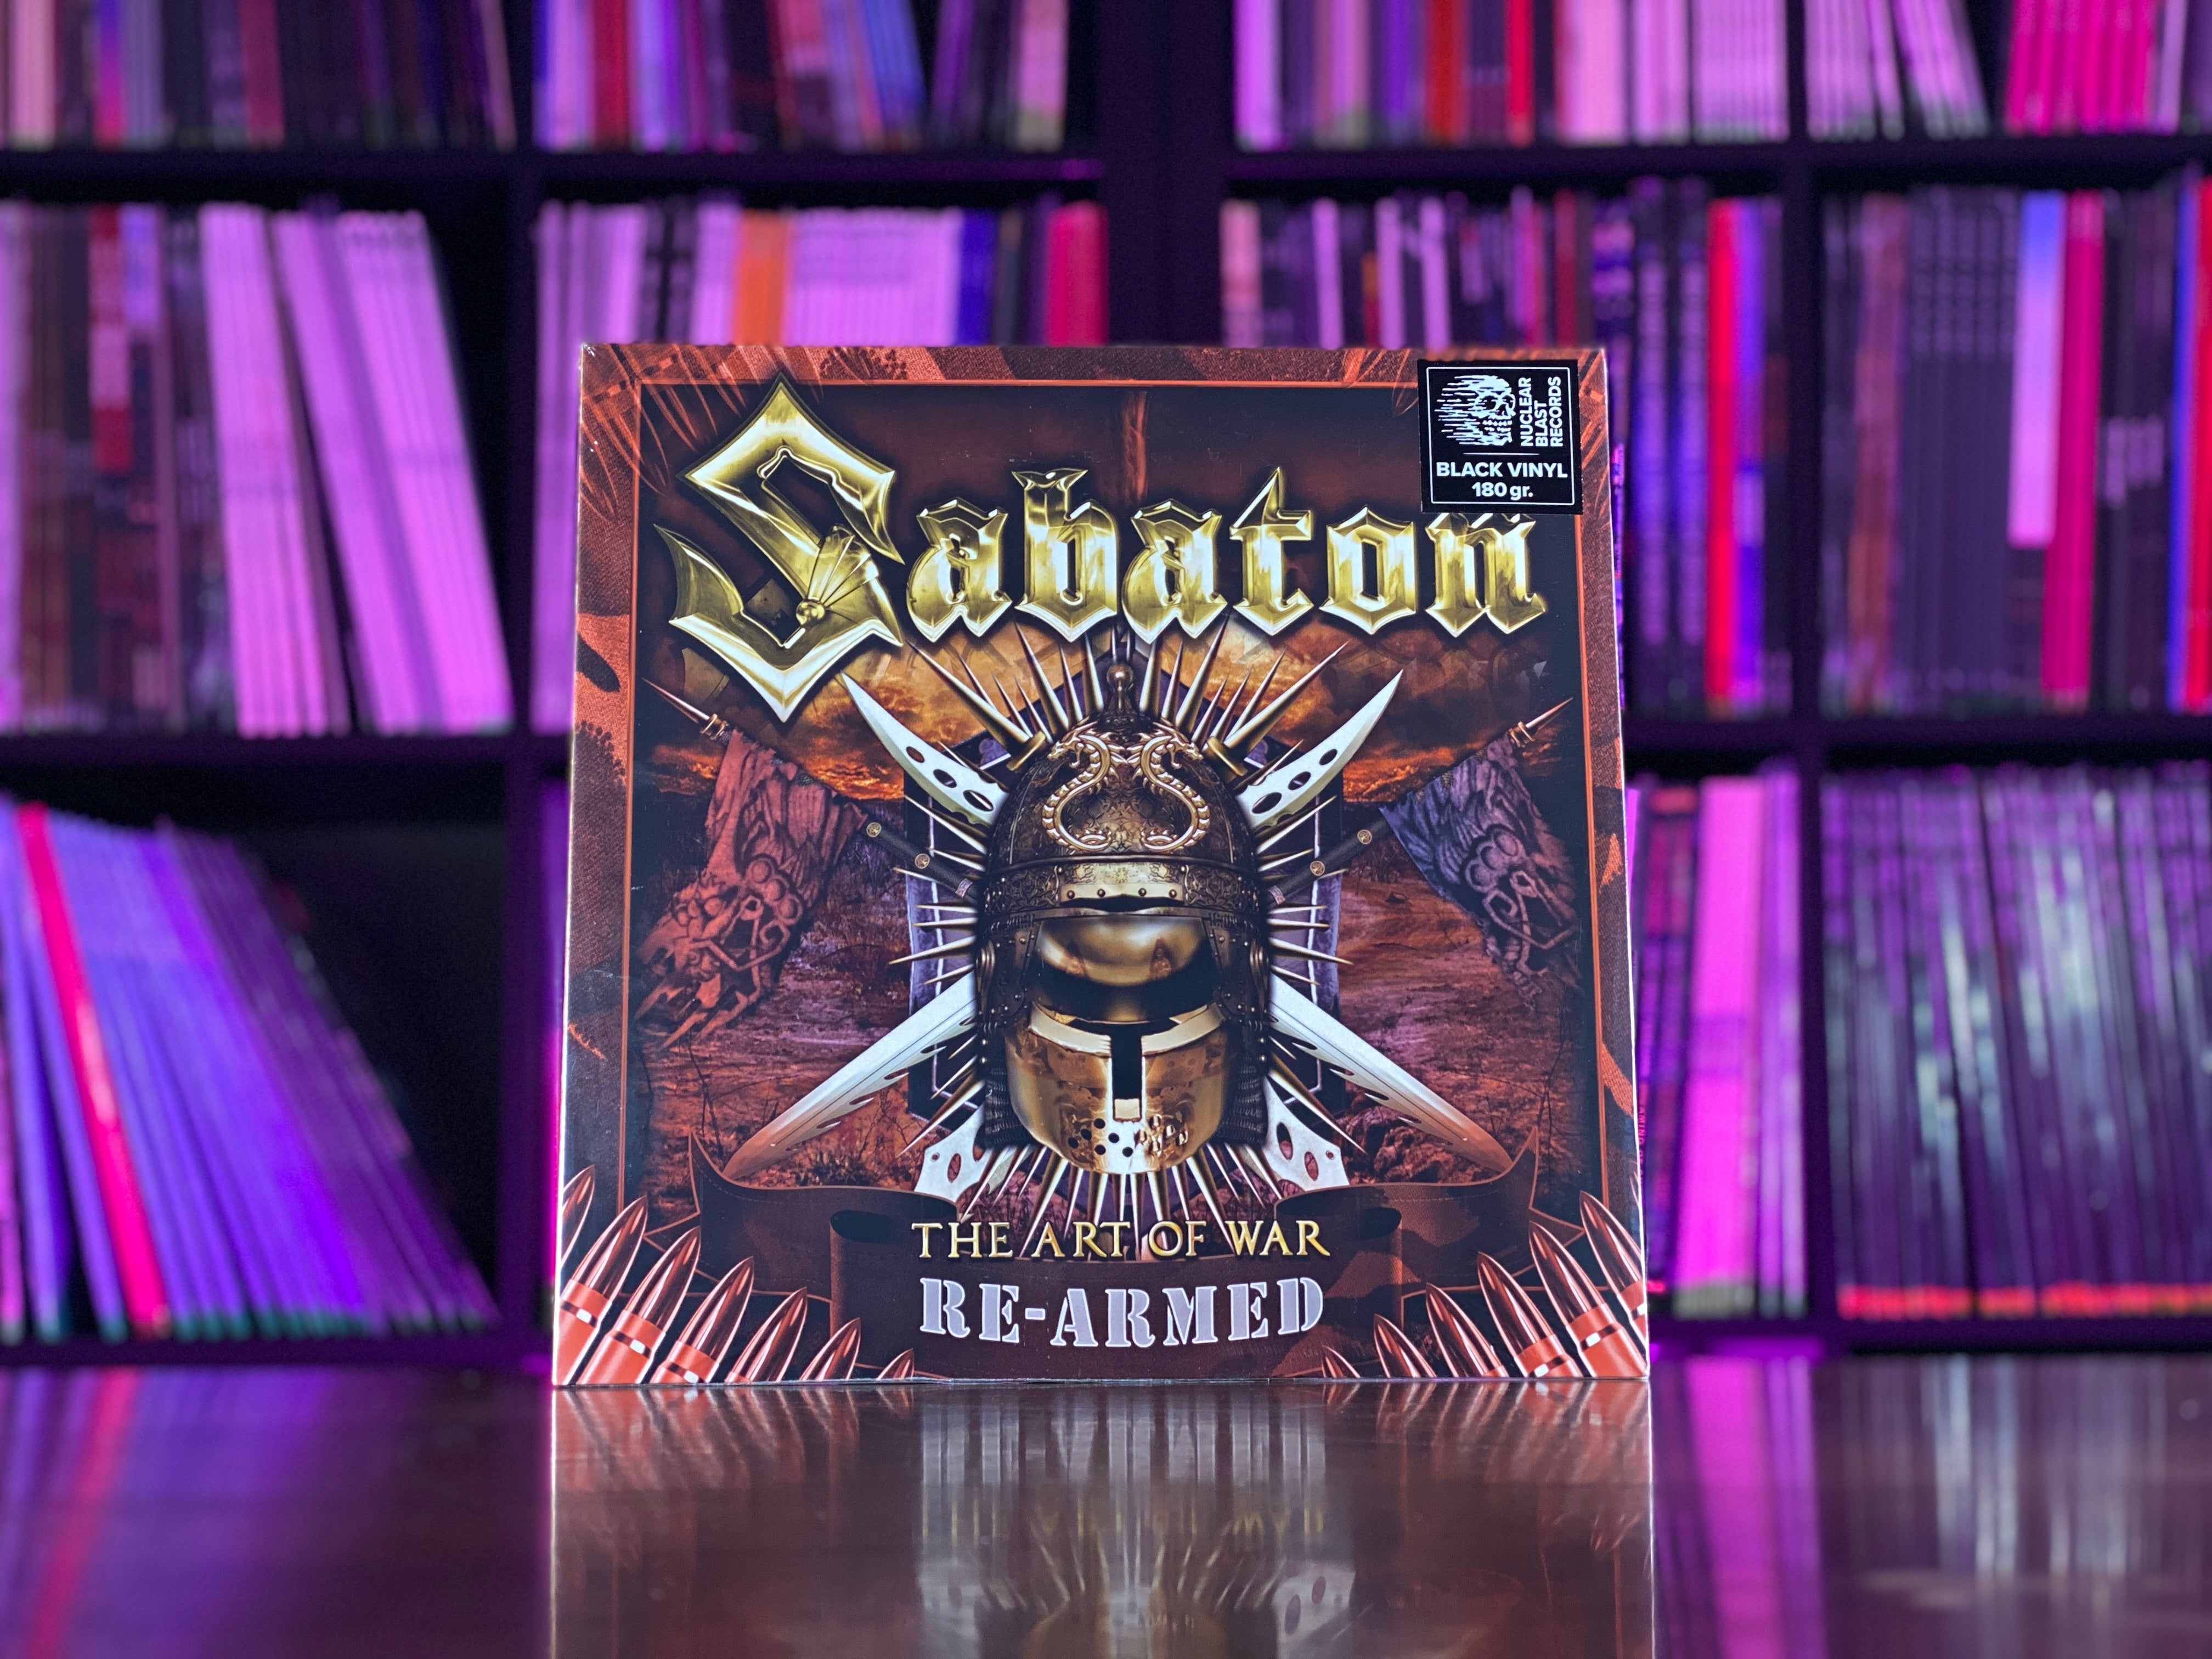 Sabaton - The Art of War Re-Armed – Rollin' Records